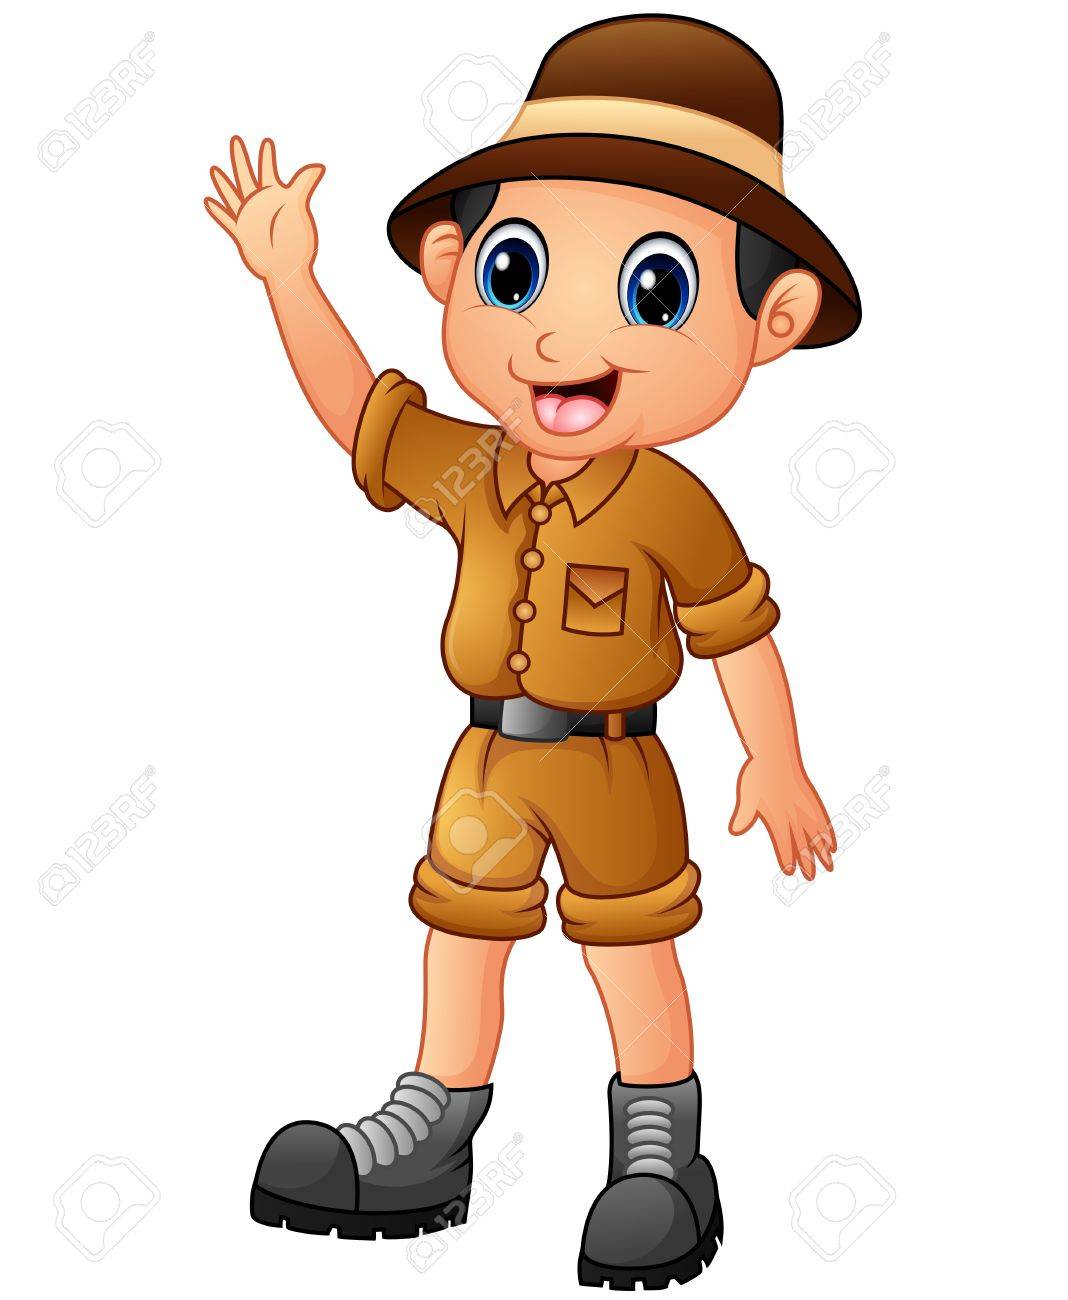 Zoo Clipart zookeeper